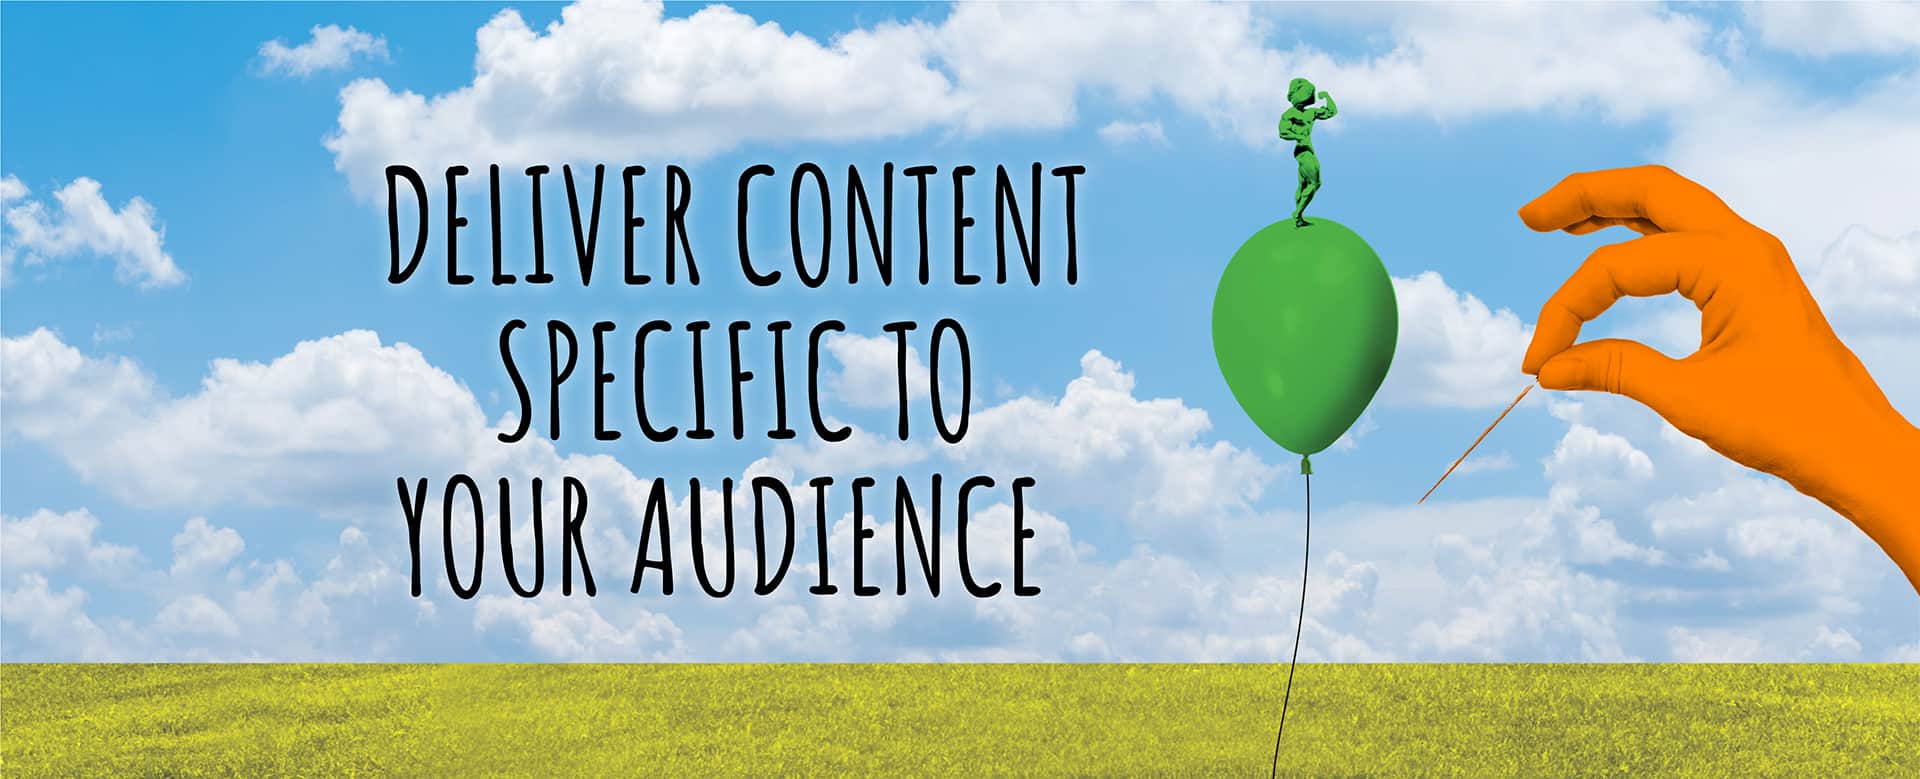 Deliver Content Specific To Your Audience